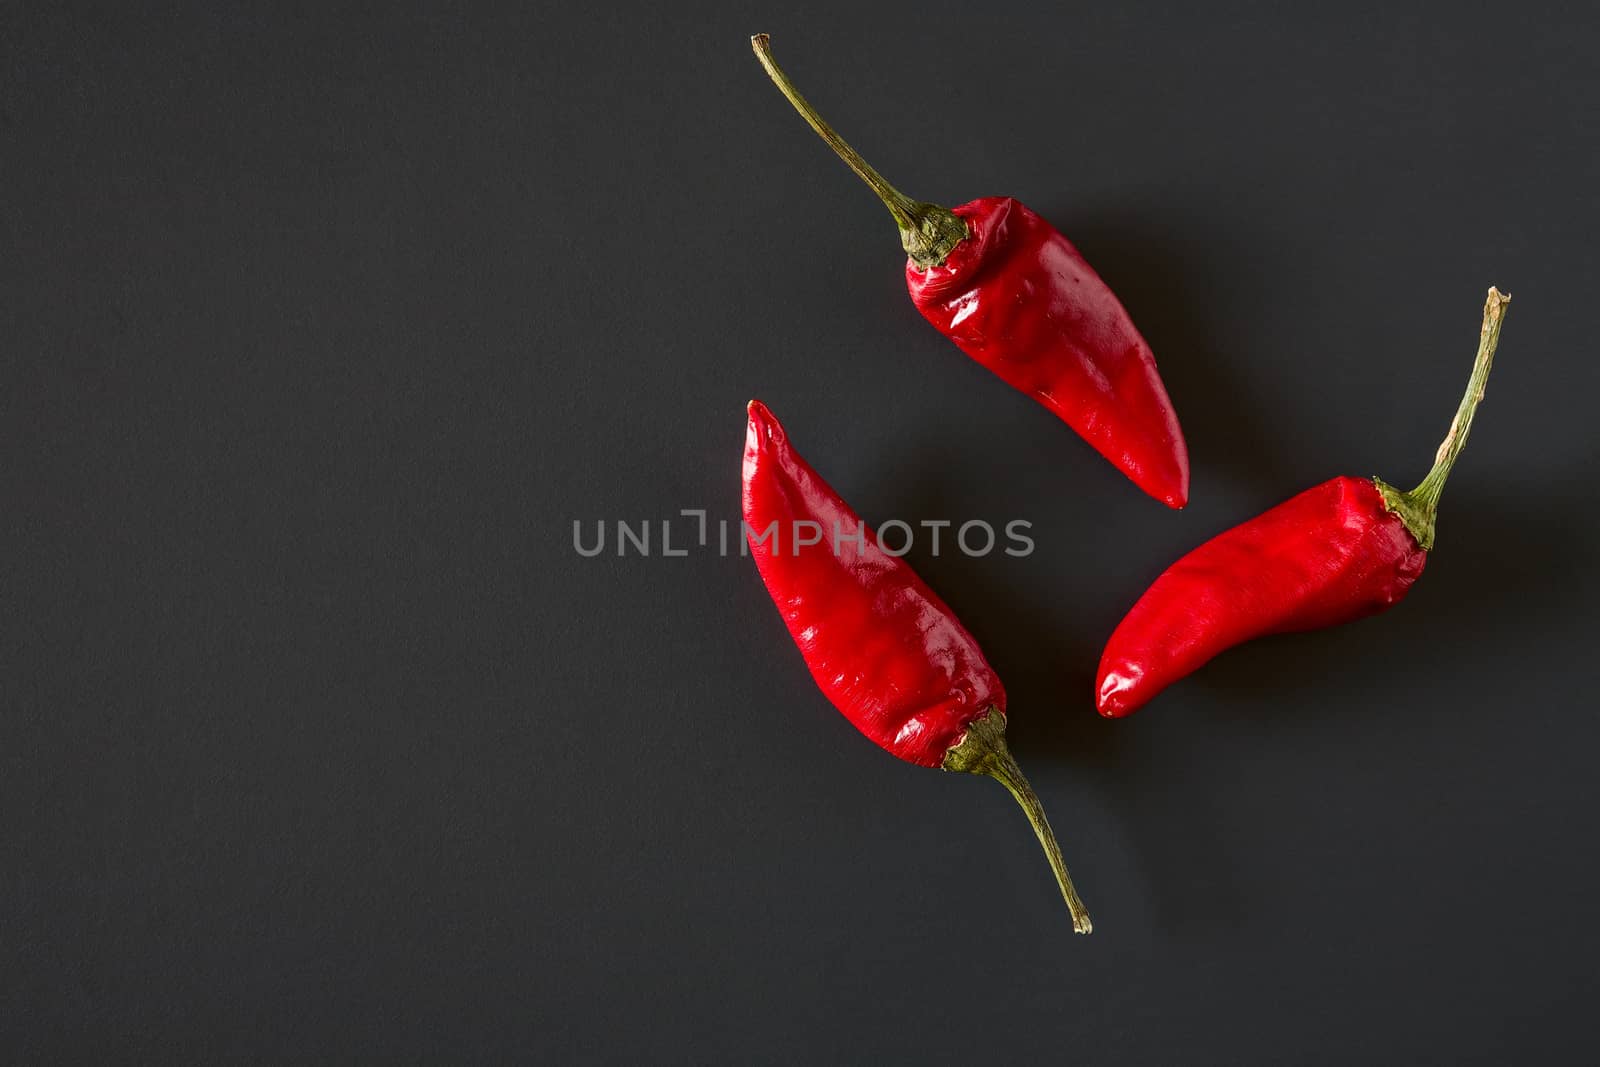 Red hot chili peppers over a dark background by LuigiMorbidelli